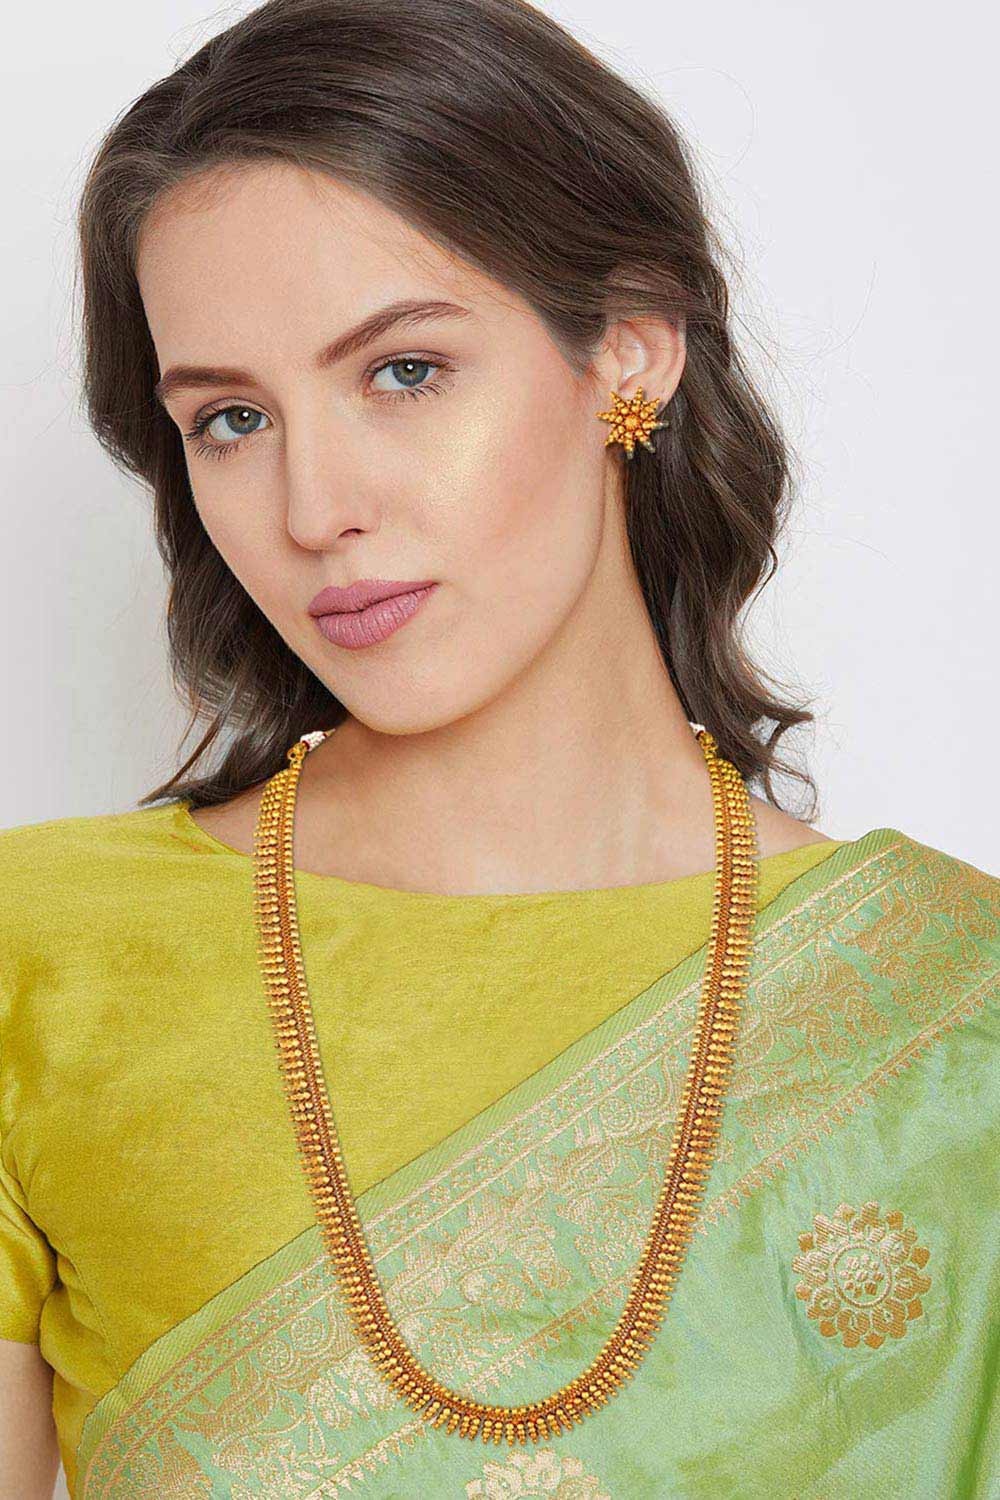 Buy Women's Alloy Necklace & Earring Sets in Gold - Front